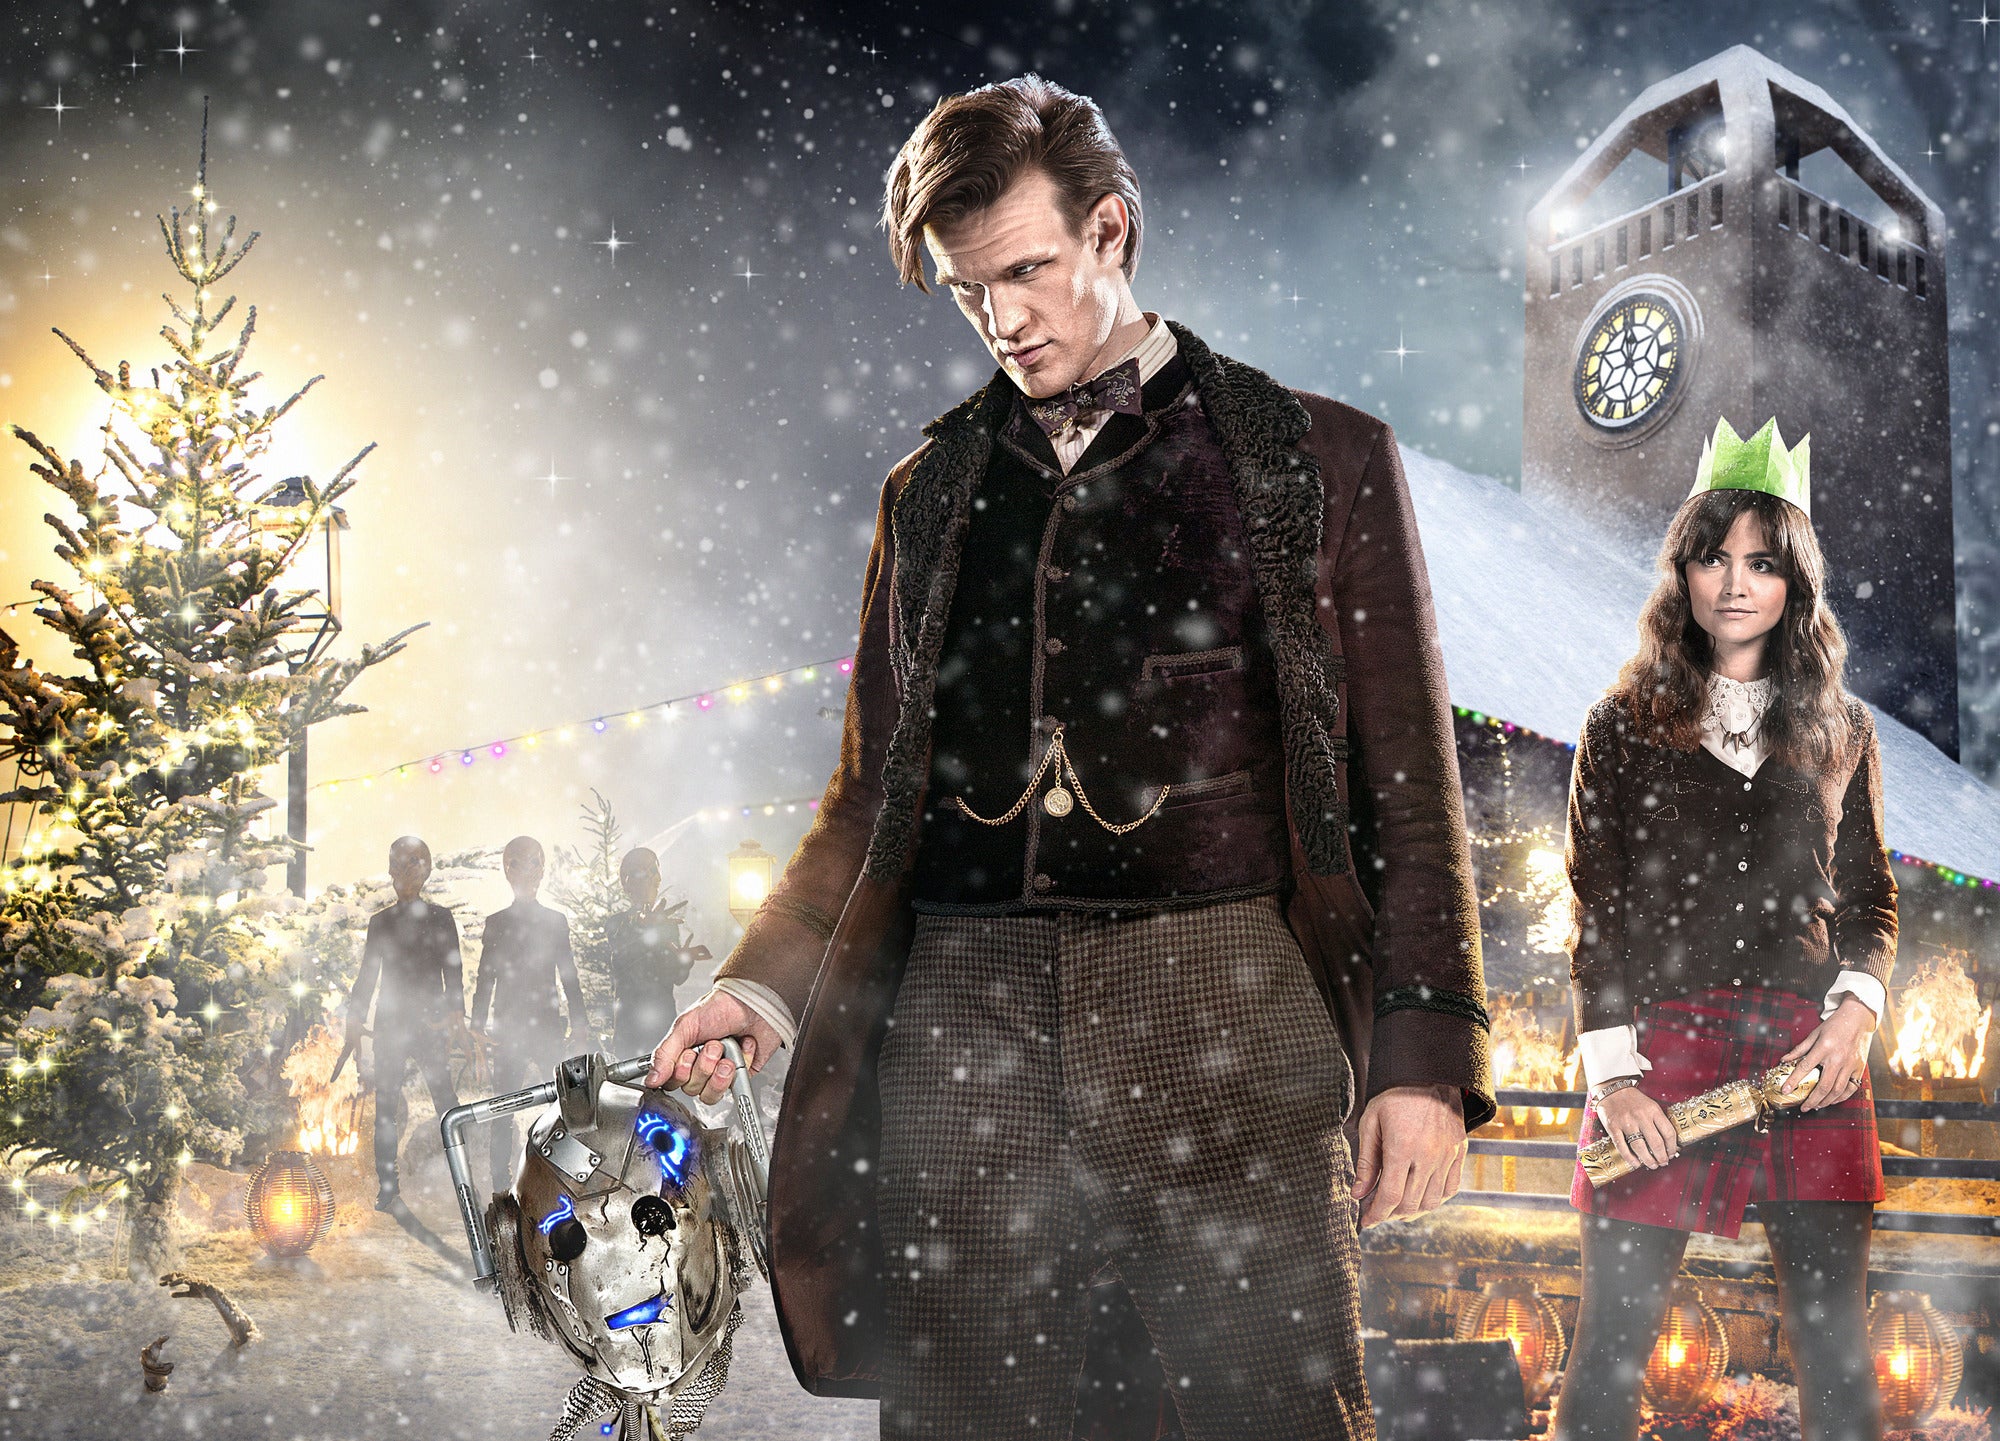 Matt Smith and Jenna-Louise Coleman in the Doctor Who Christmas special